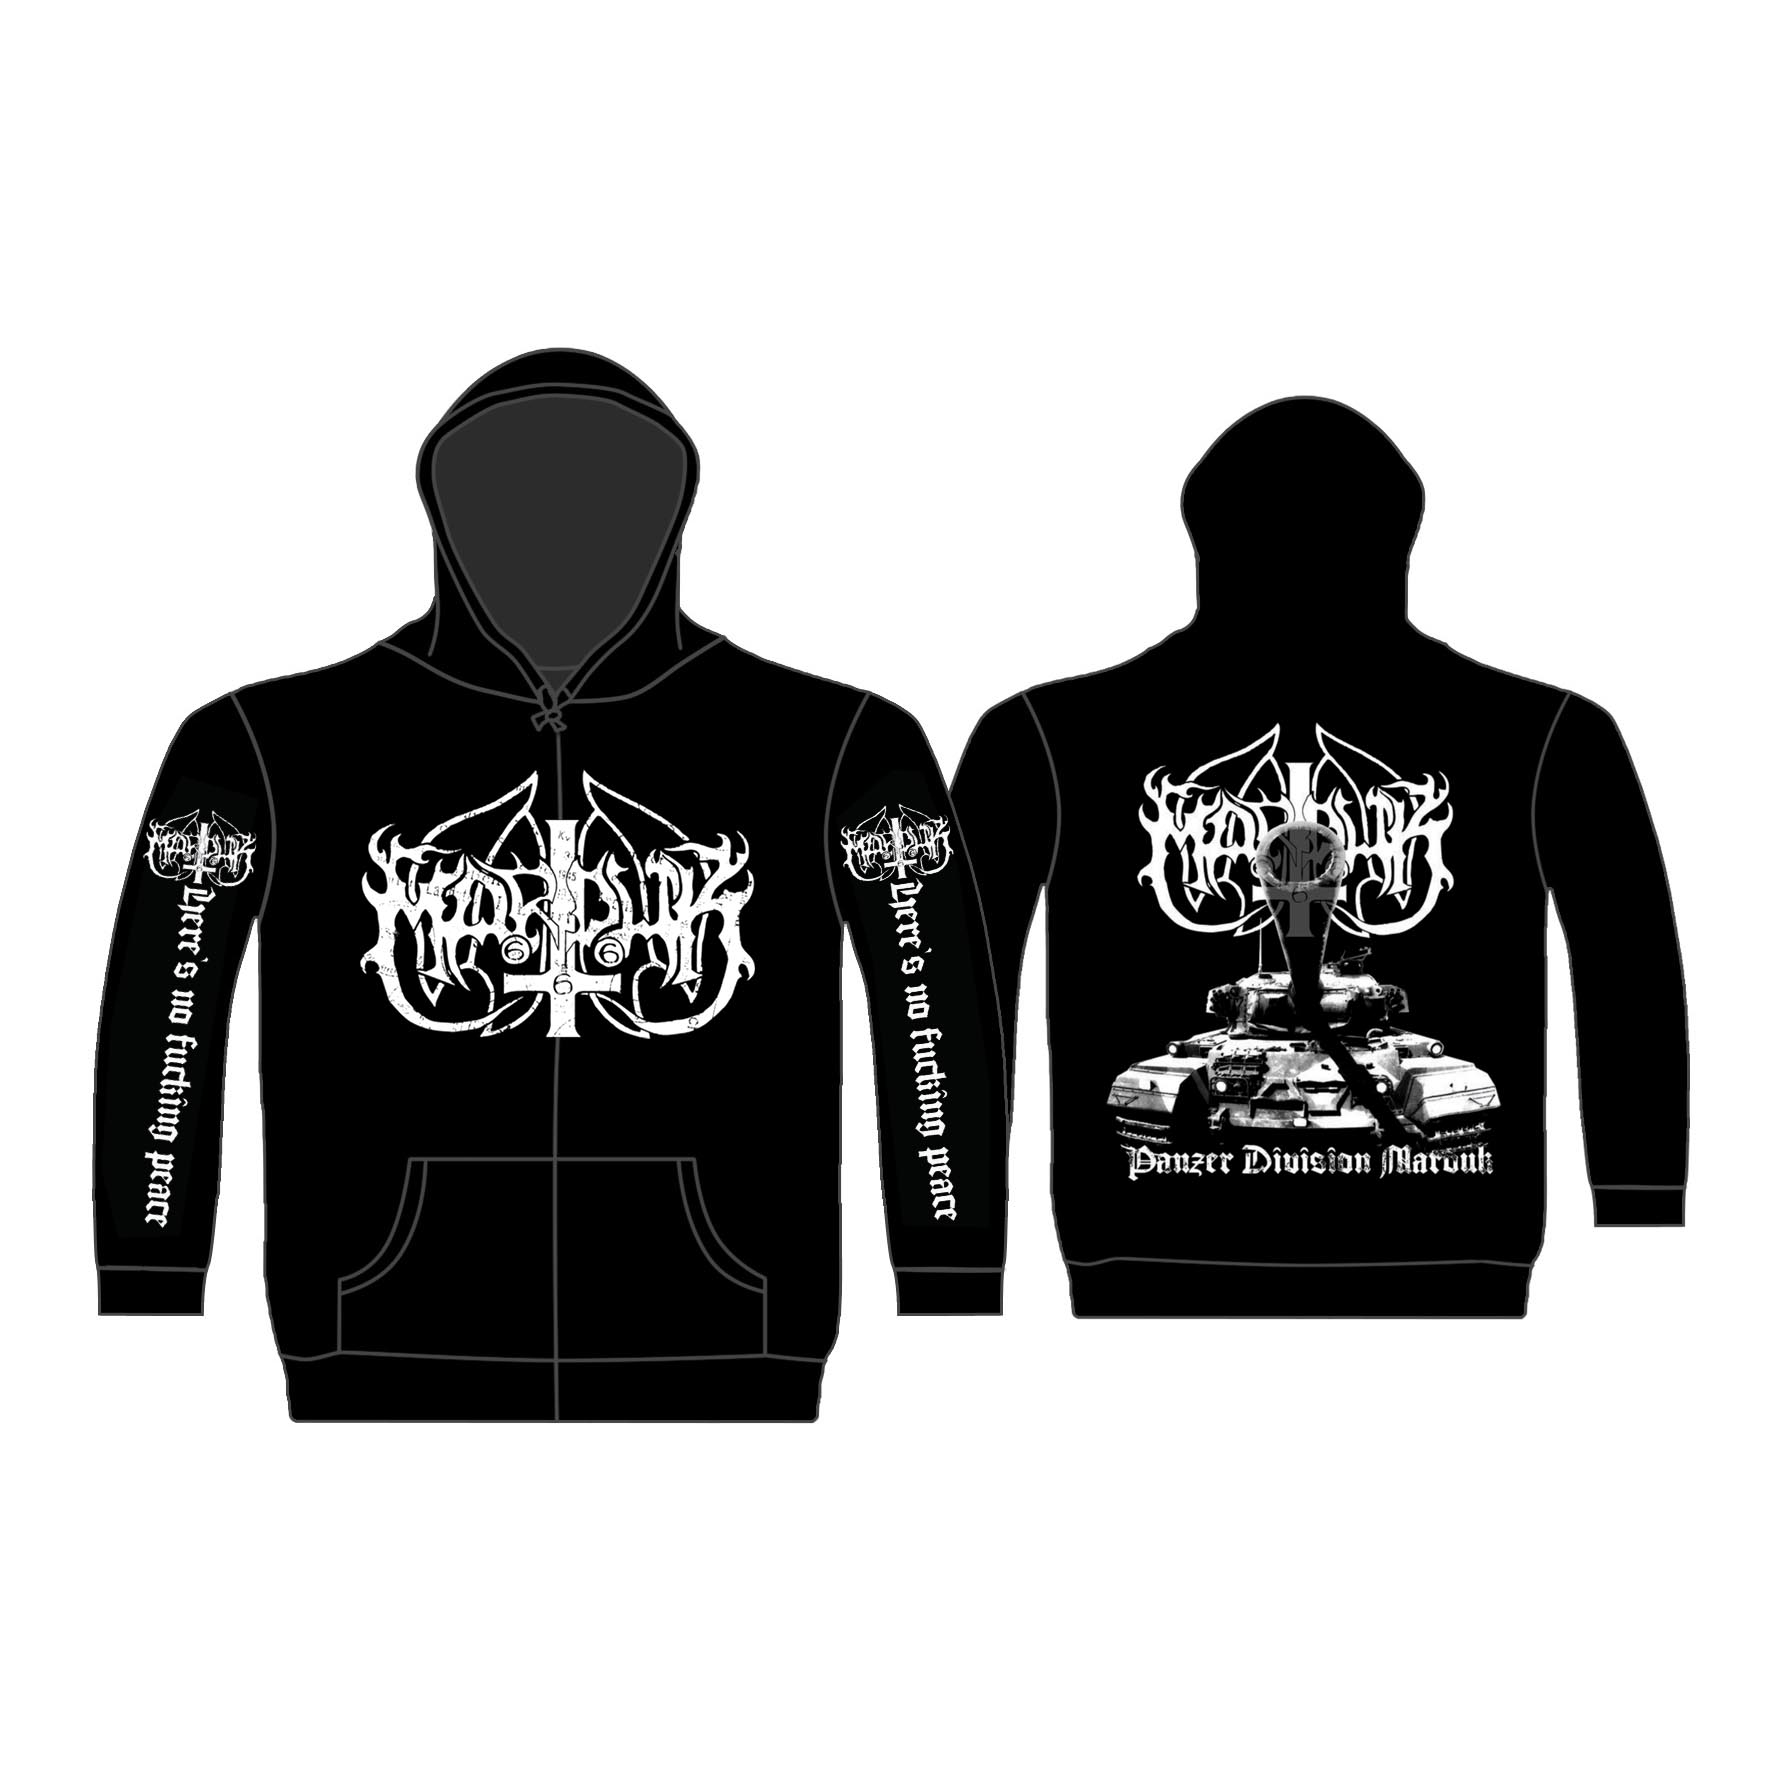 NEW & OFFICIAL! Marduk 'Panzer Division Marduk' Zip Up Hoodie